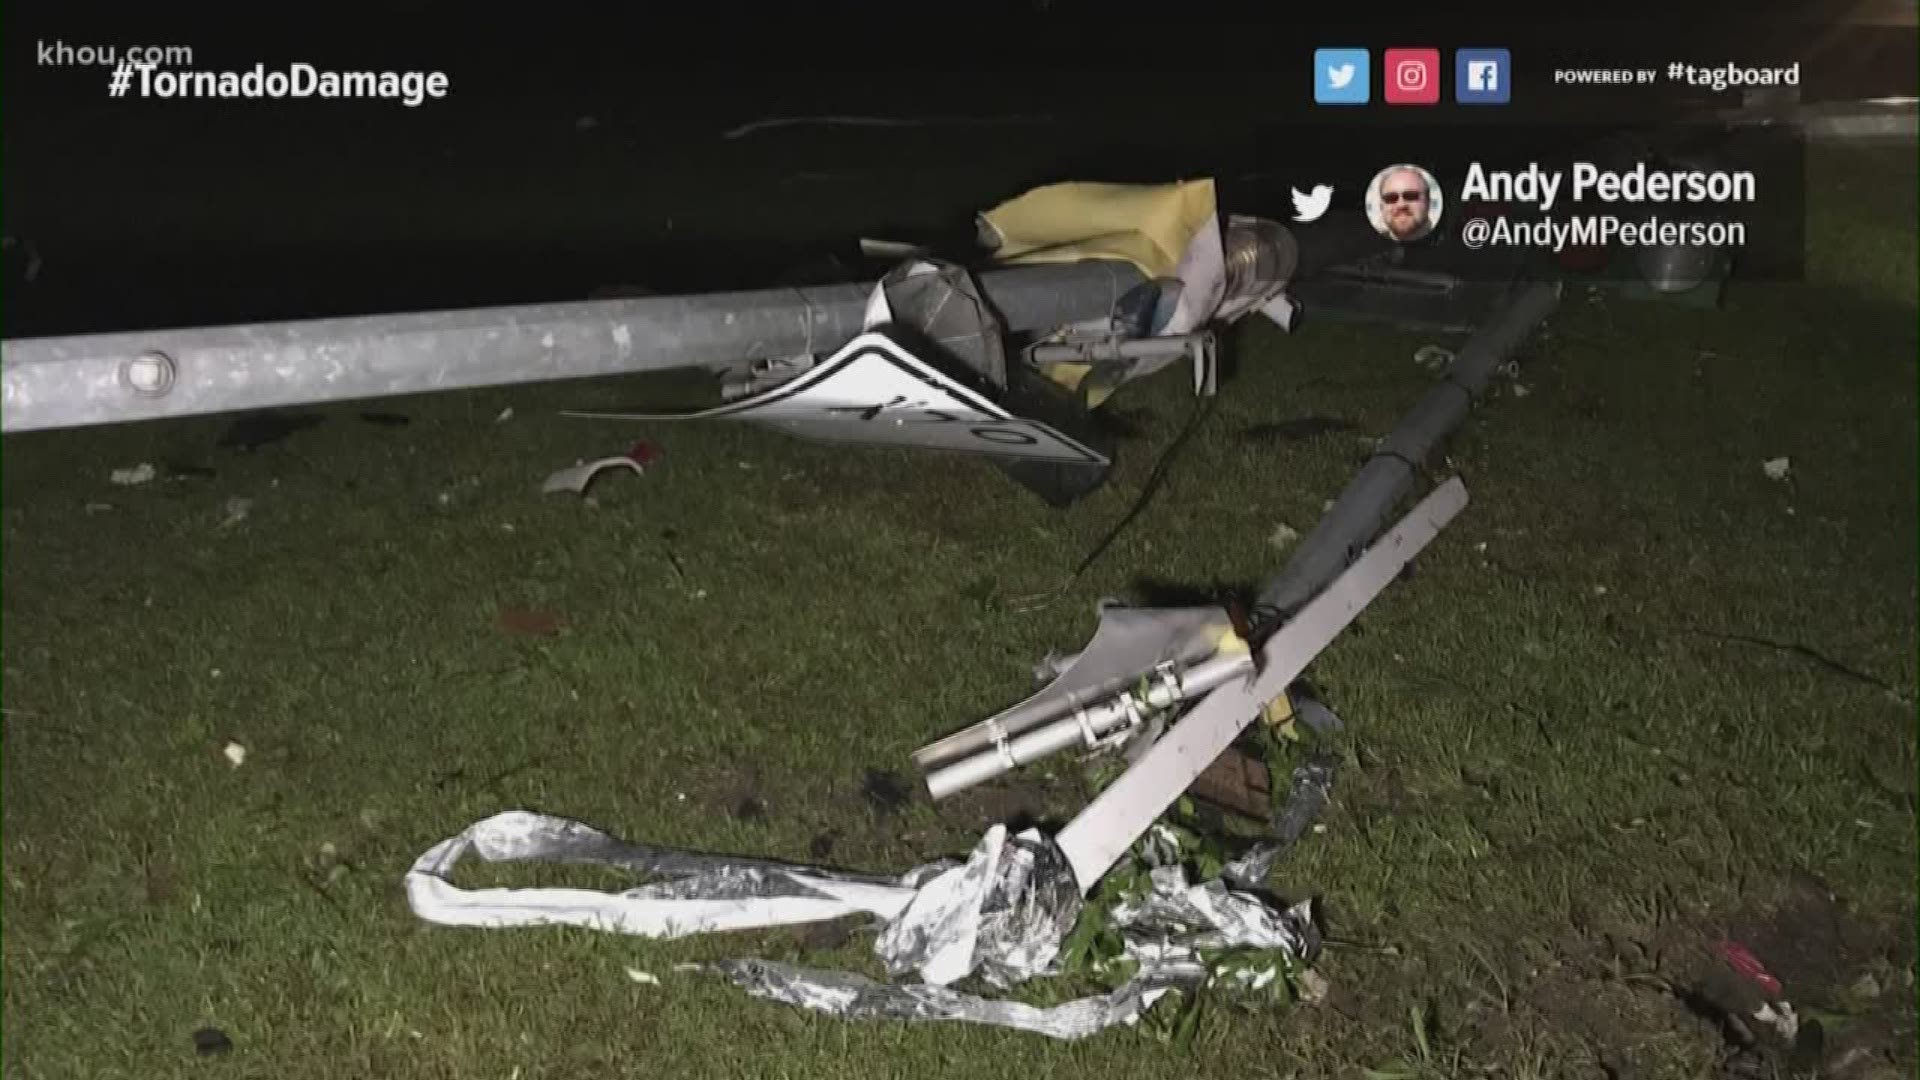 #HTownRush reports on overnight storm damage that led to two deaths in Ruston, La.